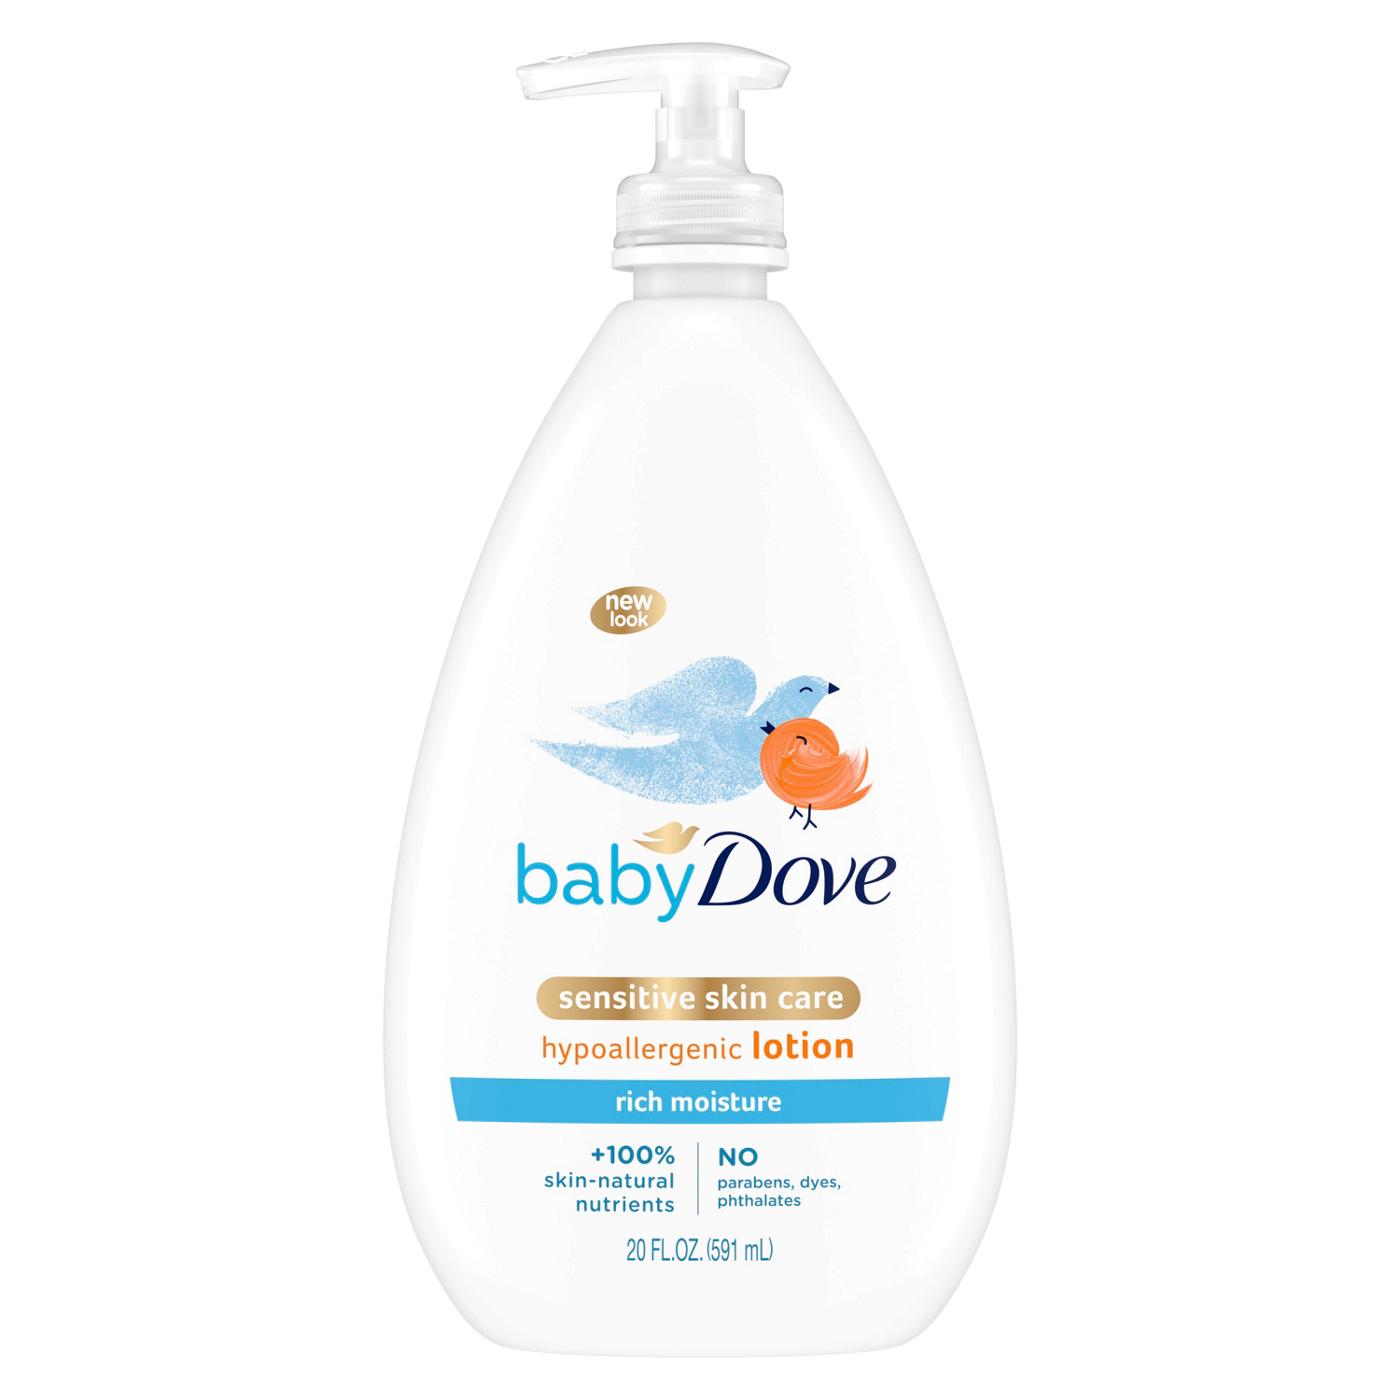 Baby Dove Sensitive Skin Care Rich Moisture Body Lotion; image 1 of 3